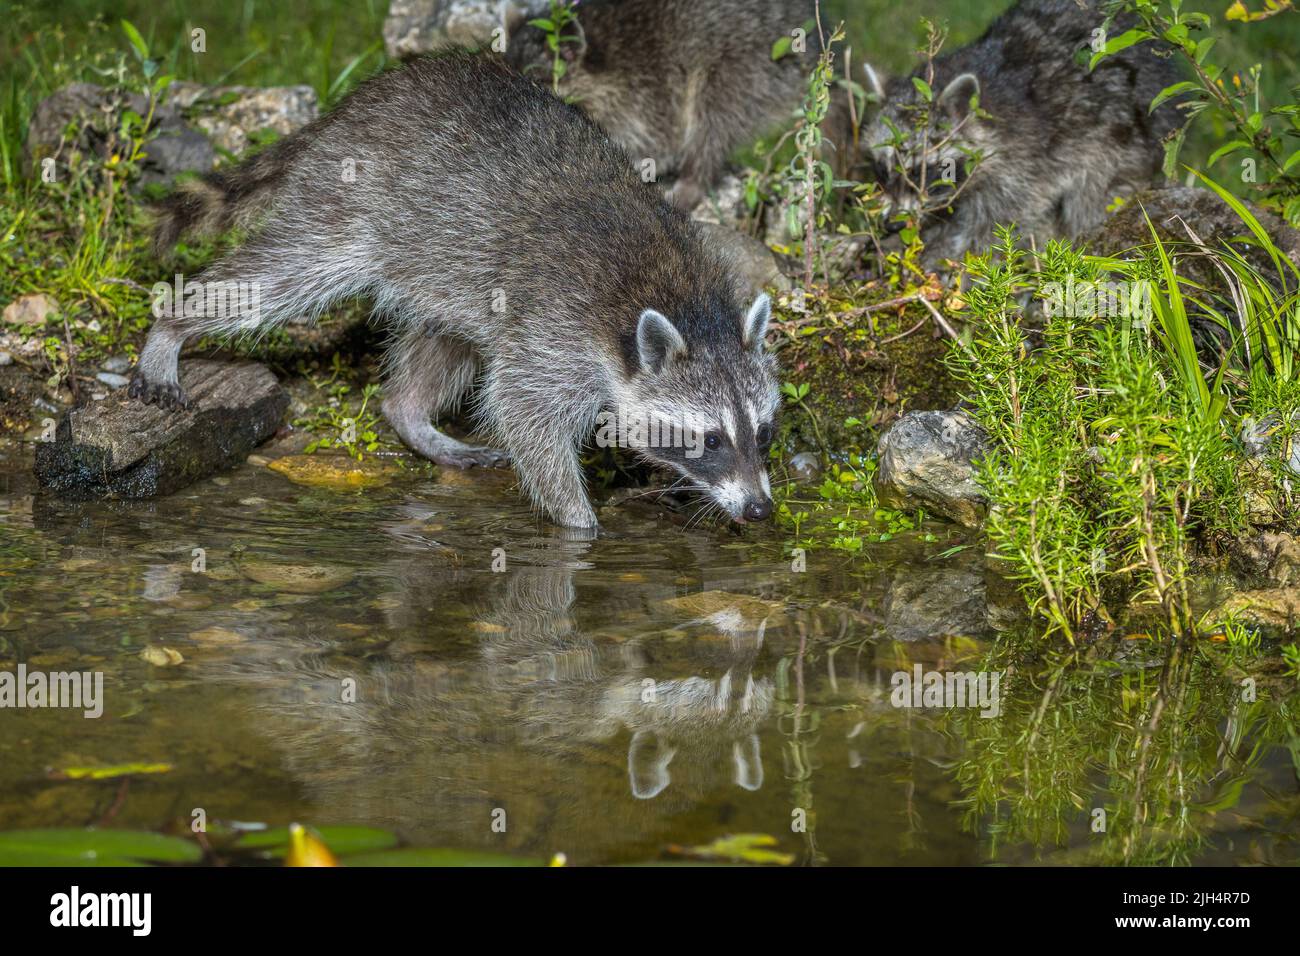 common raccoon (Procyon lotor), young raccoons at a garden pond, Germany, Baden-Wuerttemberg Stock Photo